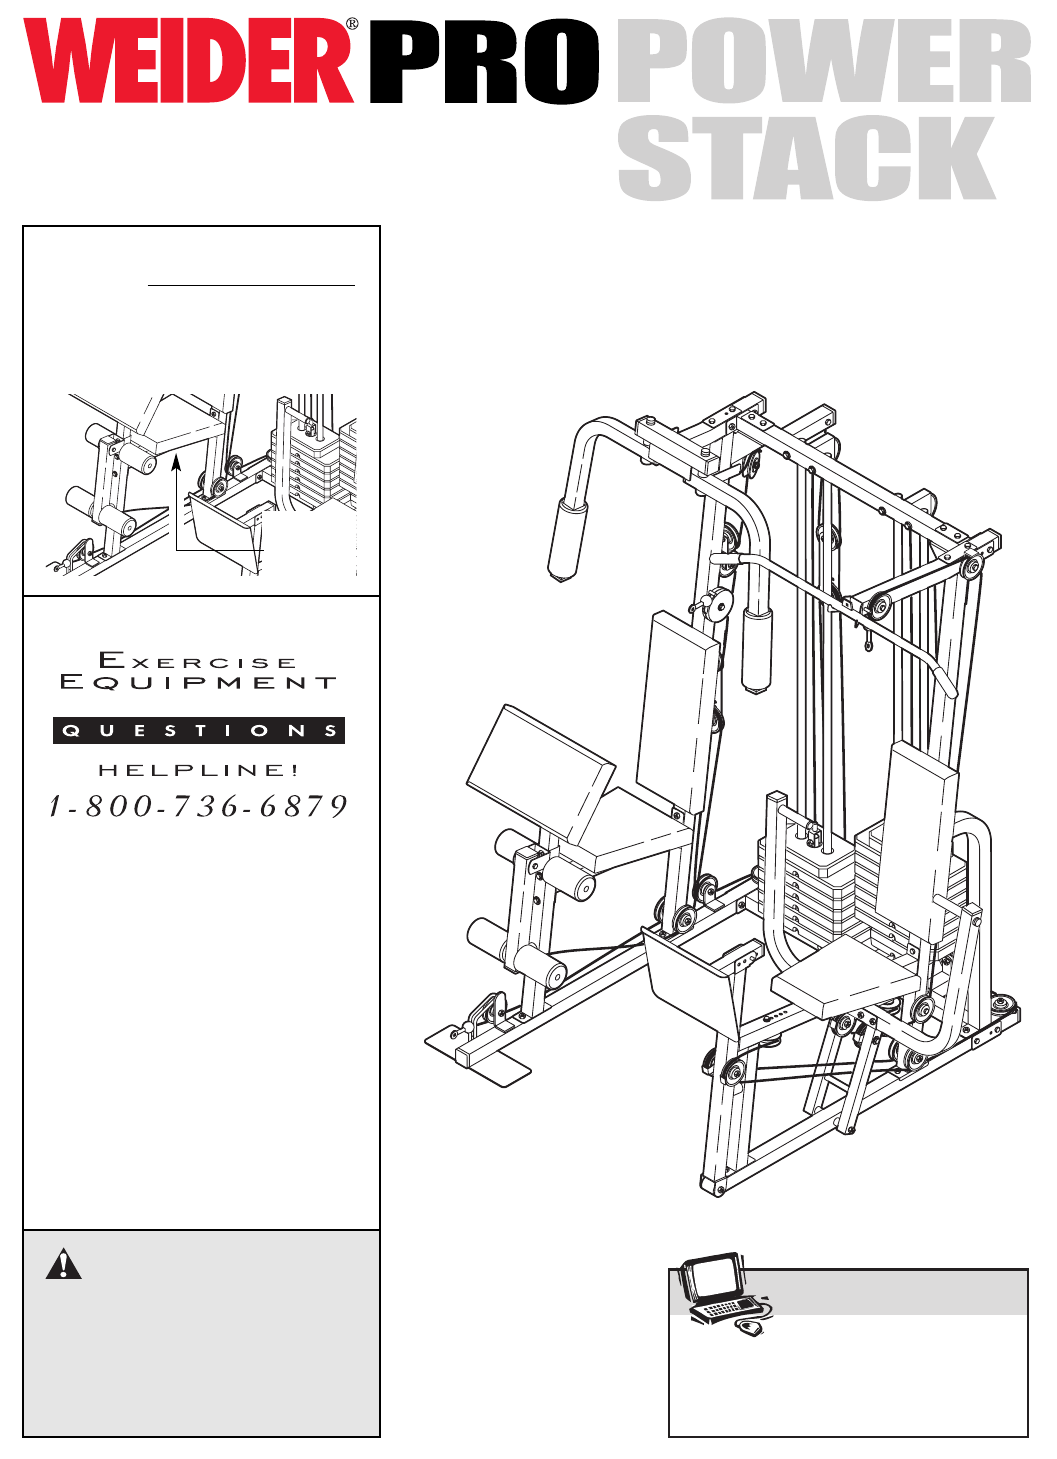 Weider Pro Power Stack 550 Exercise Chart